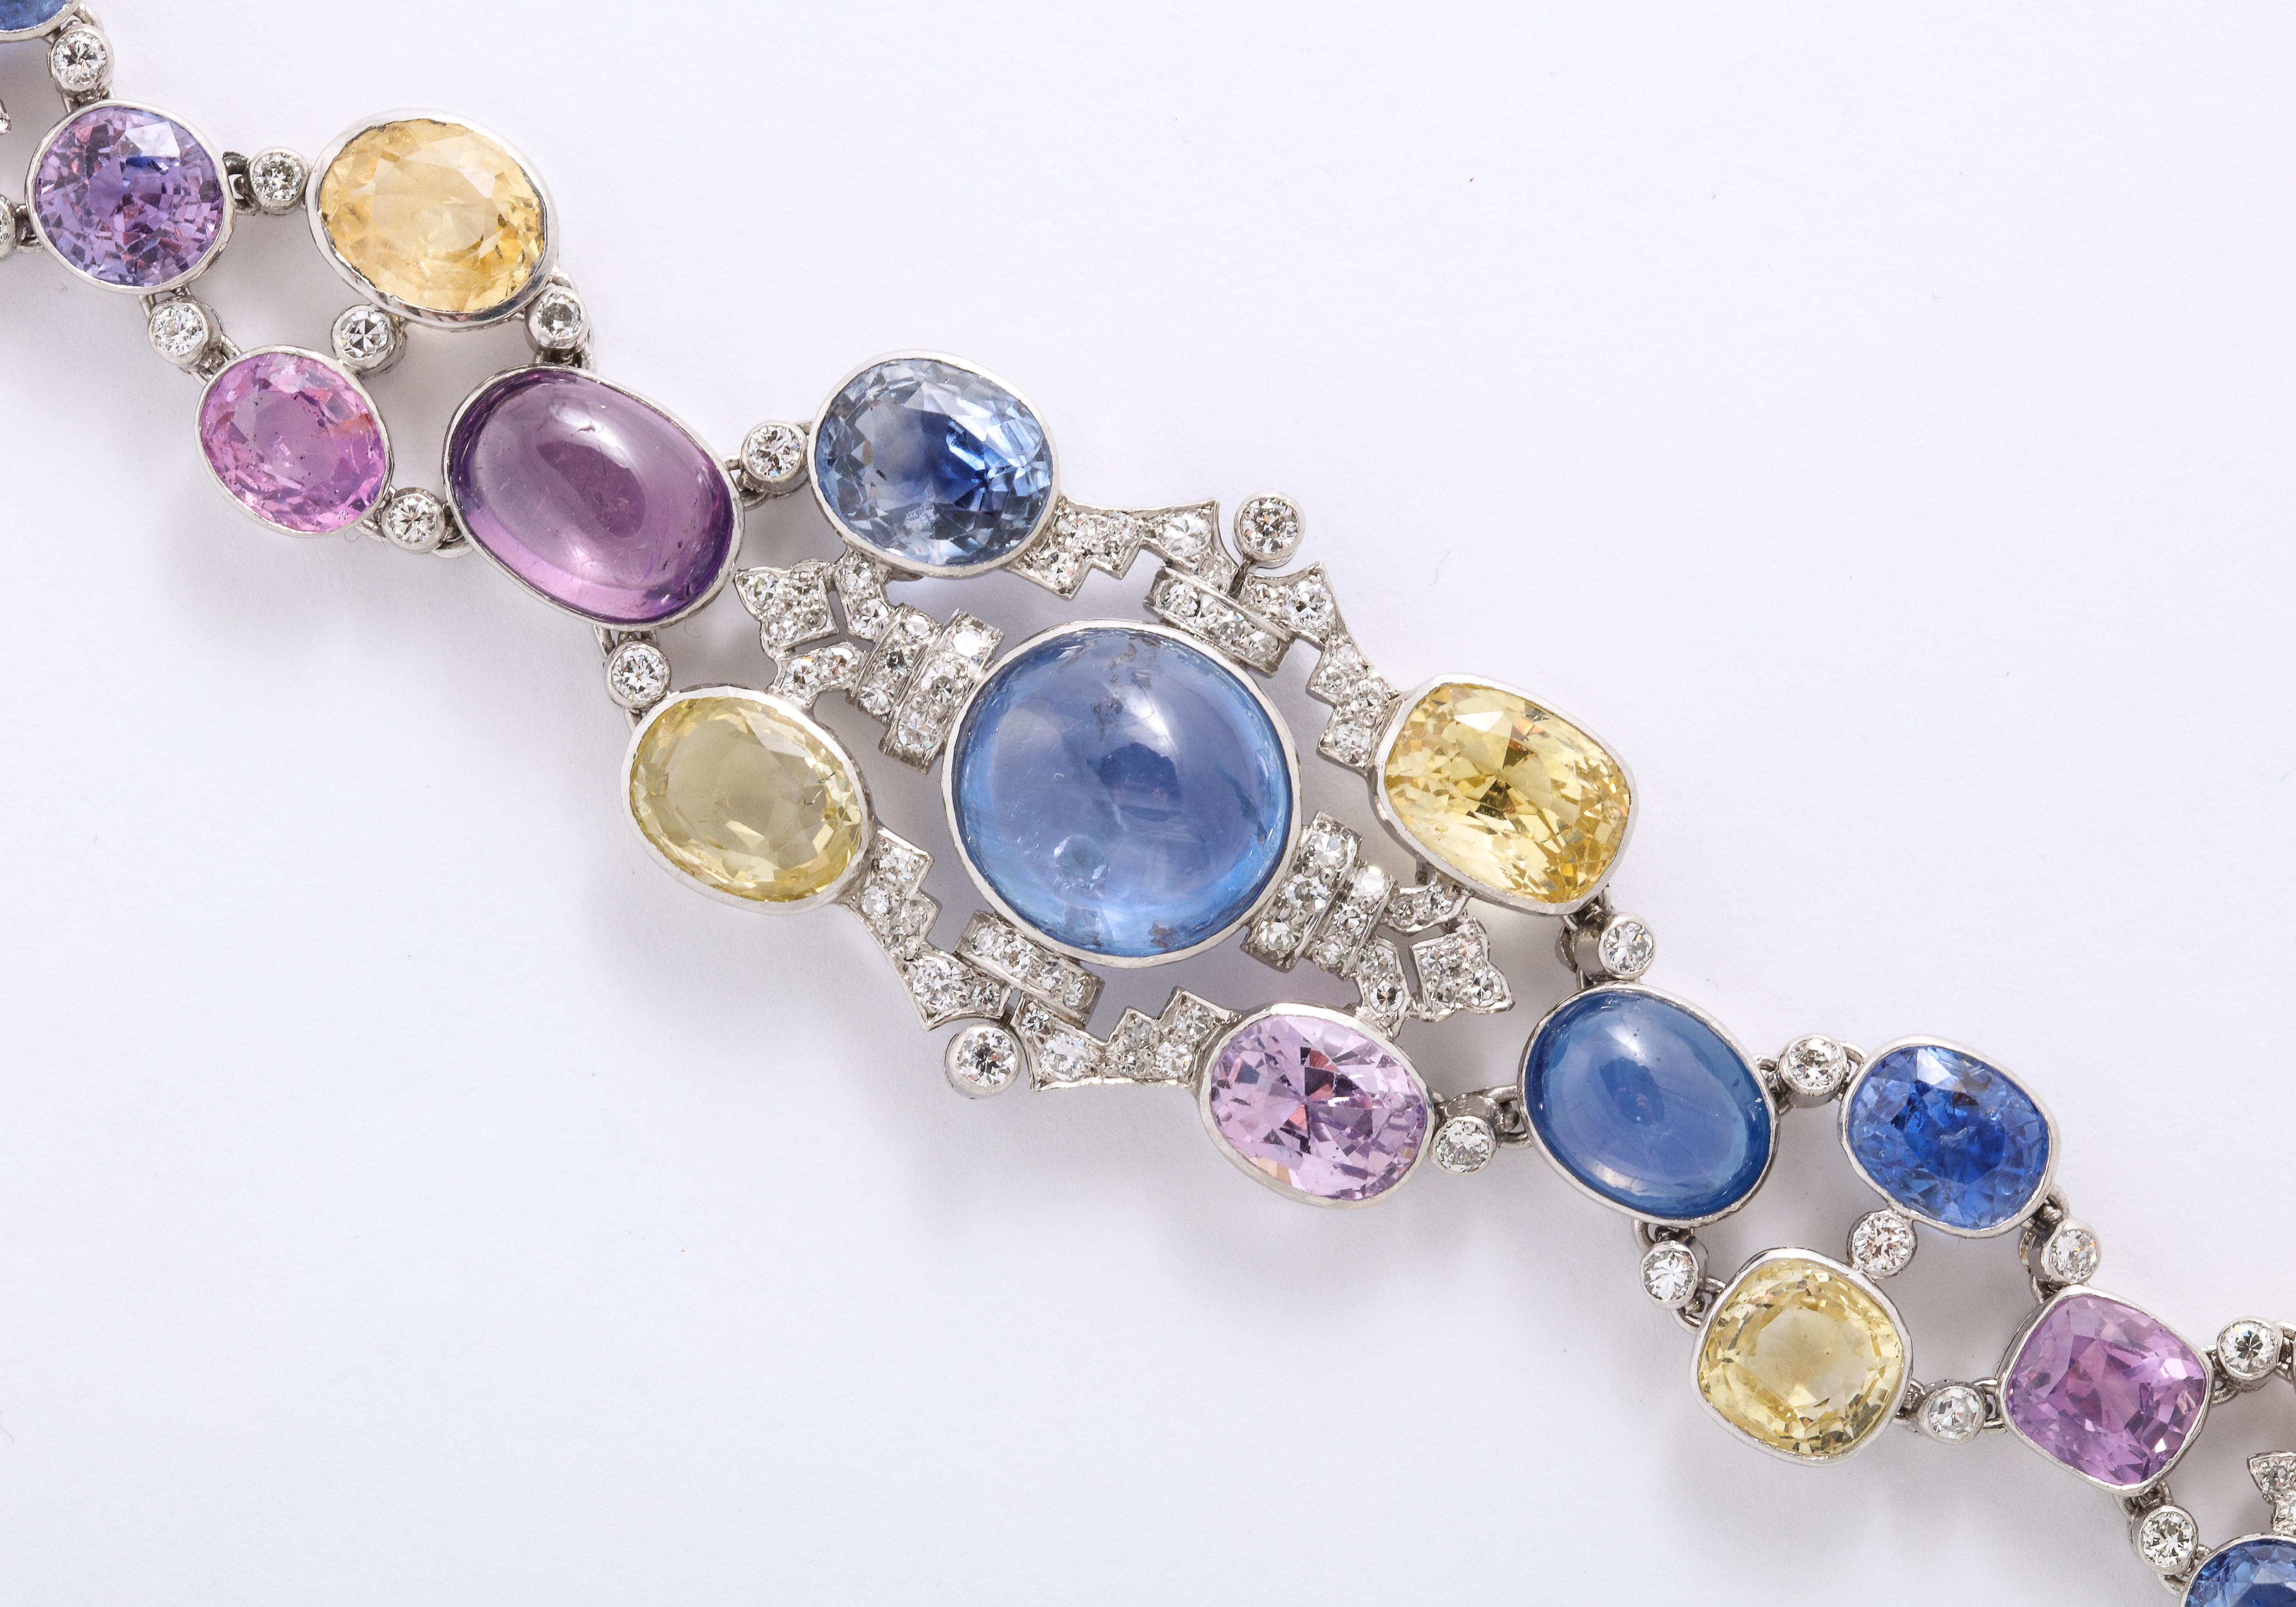 1960's Important Made wide Multi Colored Sapphire with Diamond Bracelet, comprising of Yellow, Blue, Purple, Pink Sapphires, with a center Blue Cabochan  12 Carat Star Sapphire. 

Im Surprised this piece isn't signed by an important Jeweler,